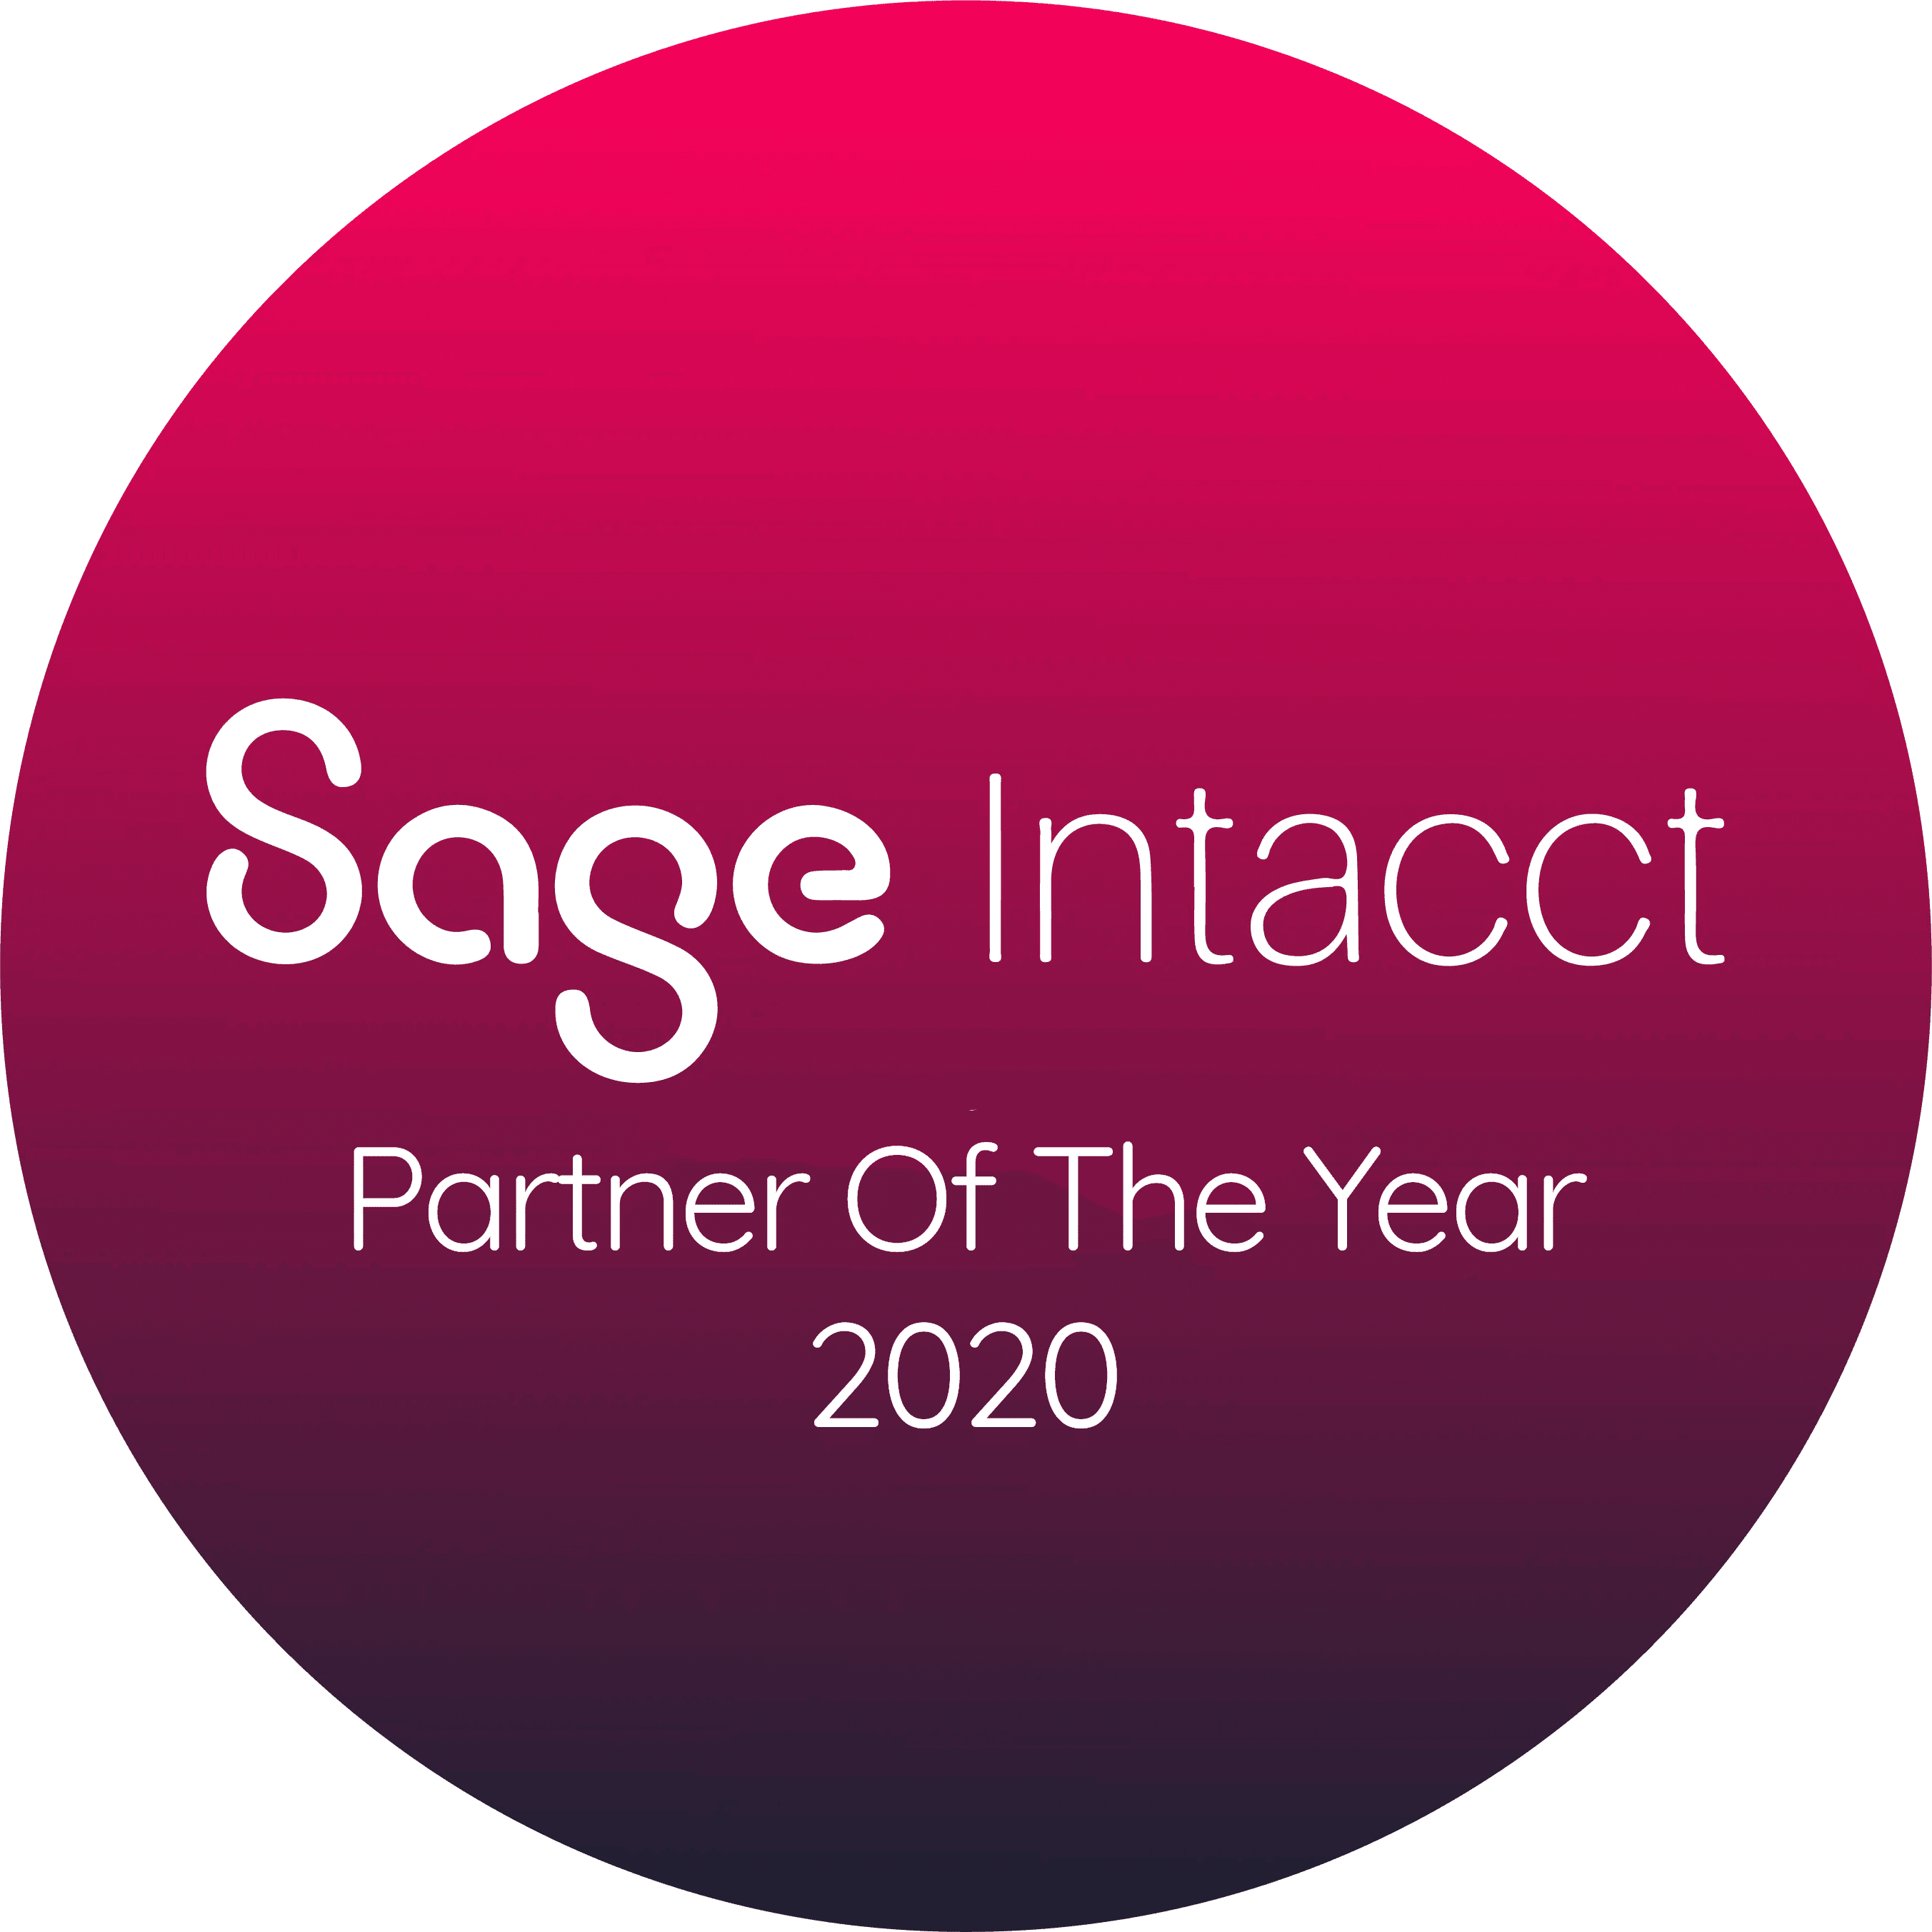 Sage interactive partner of the year 2020 specializing in cloud-based CRM solutions.